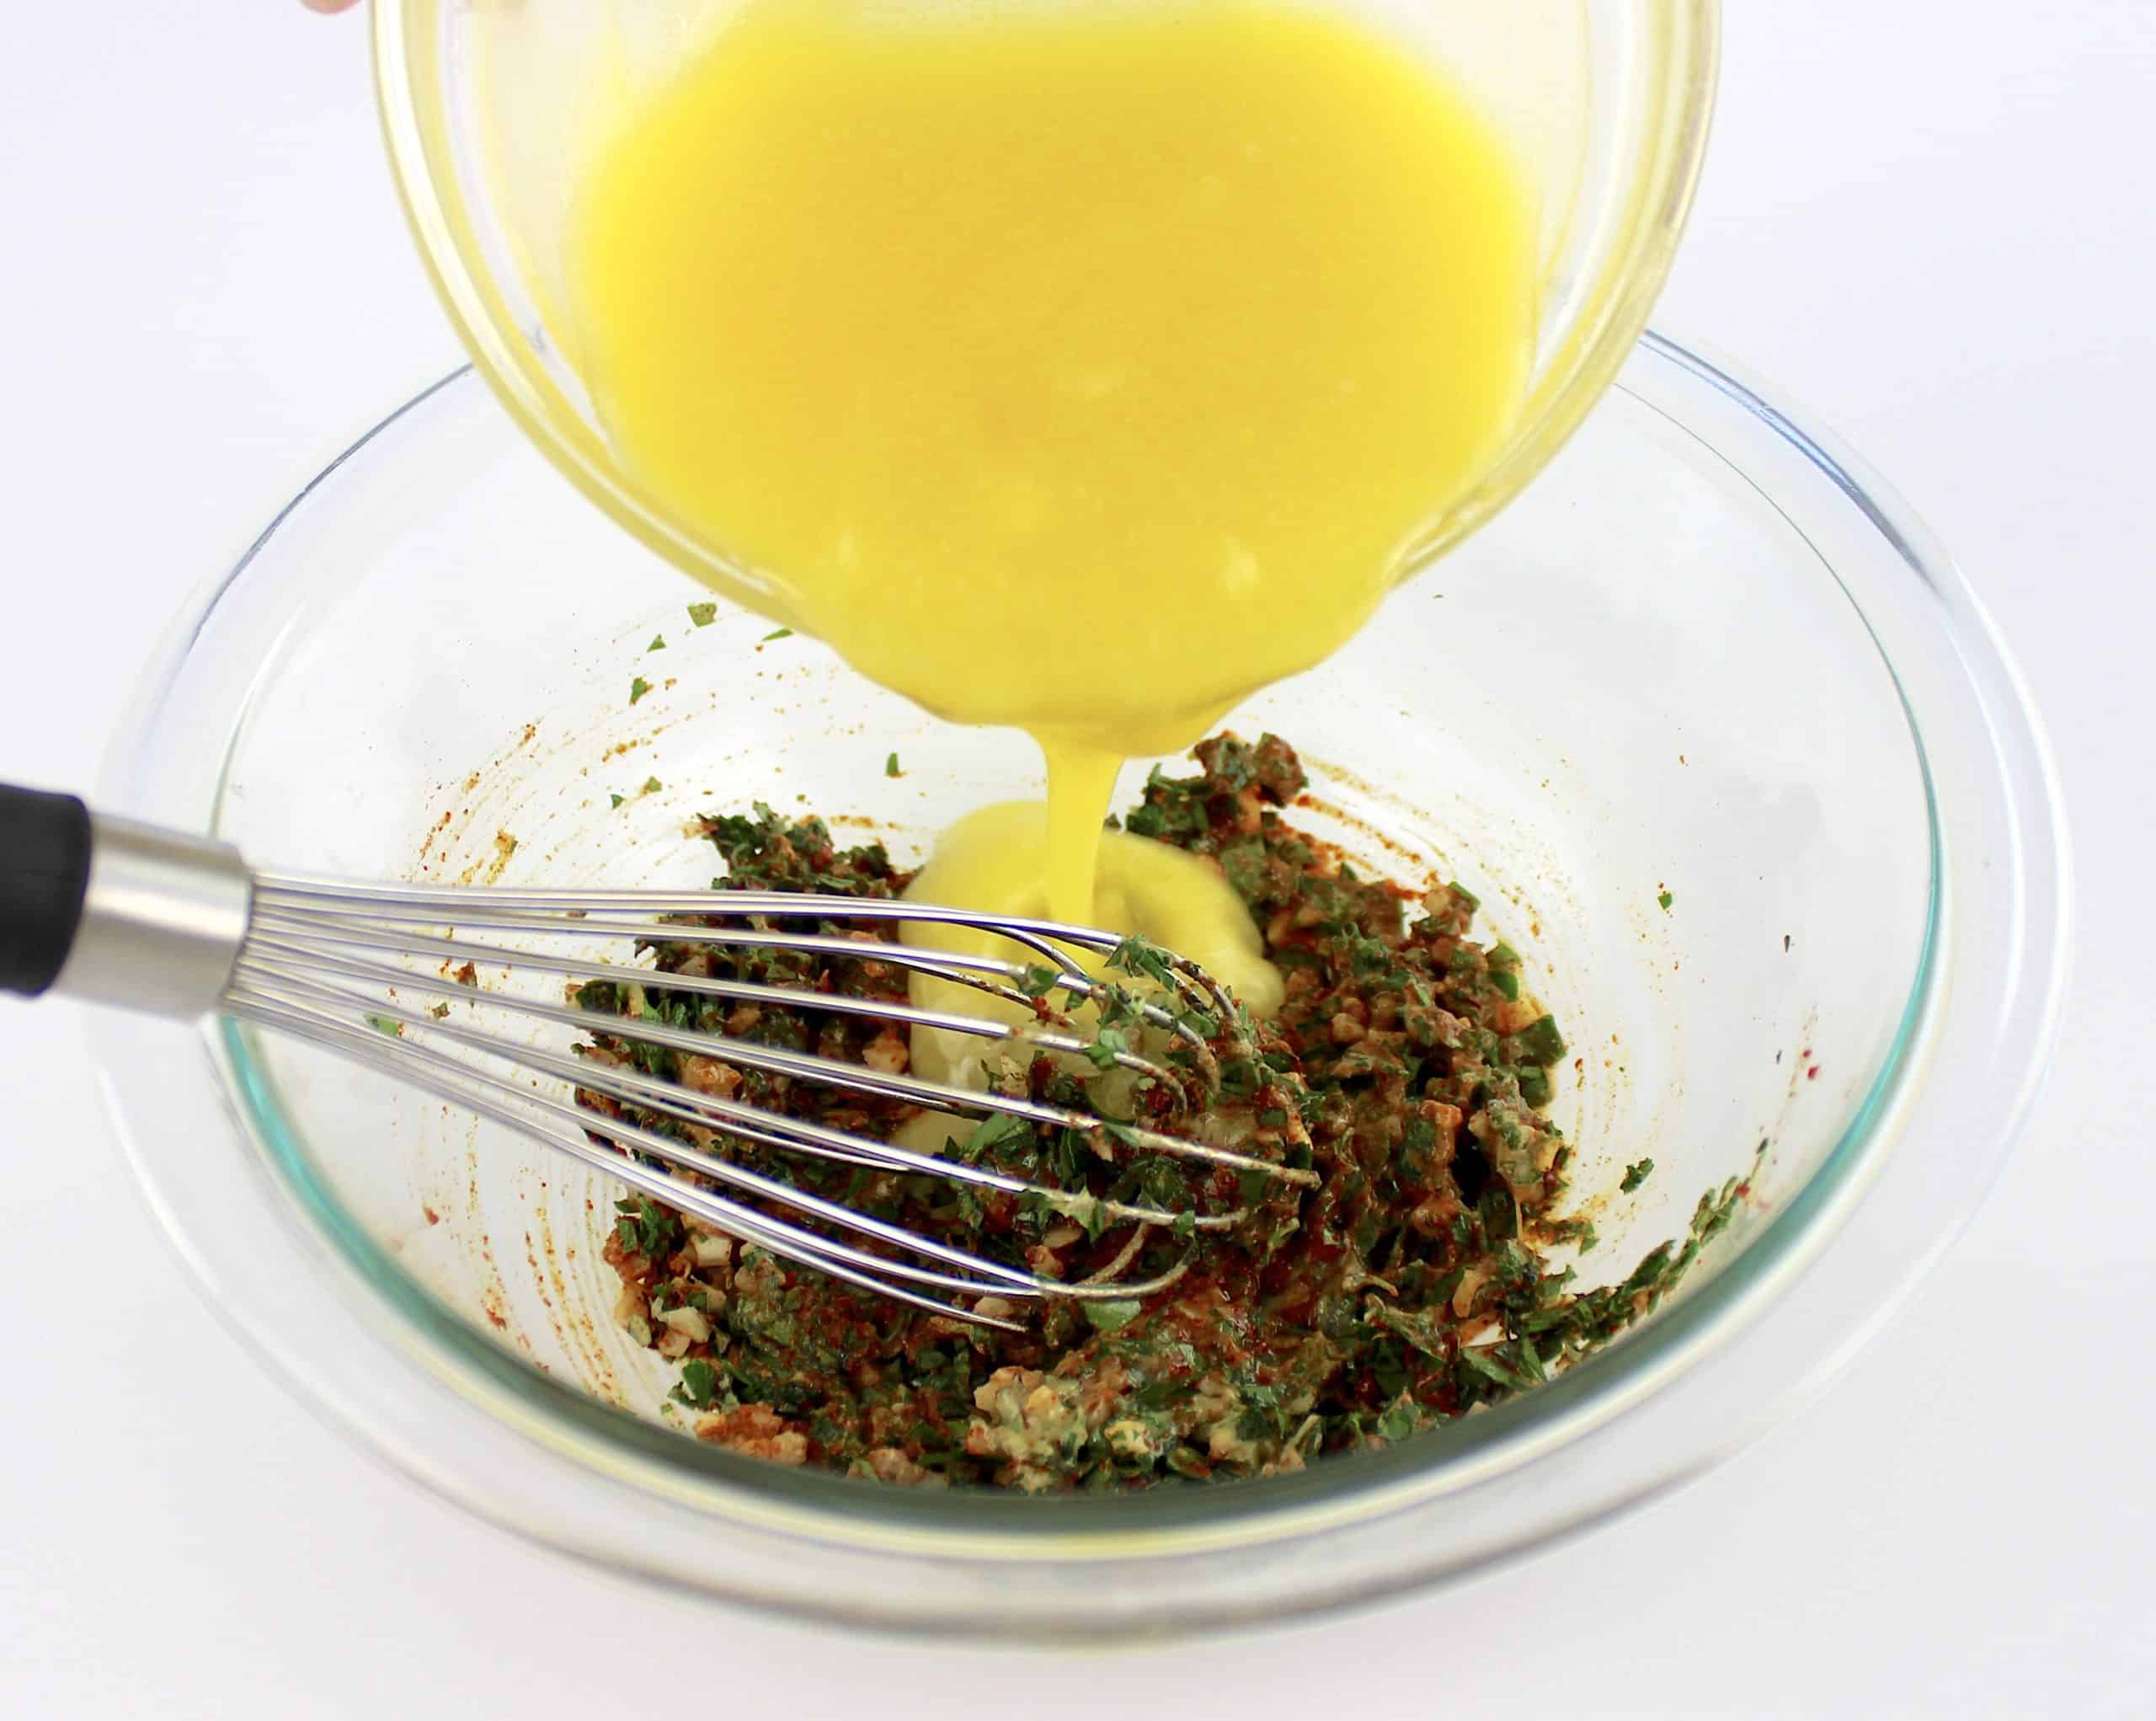 melted butter being poured into glass bowl with herbs and spices with whisk